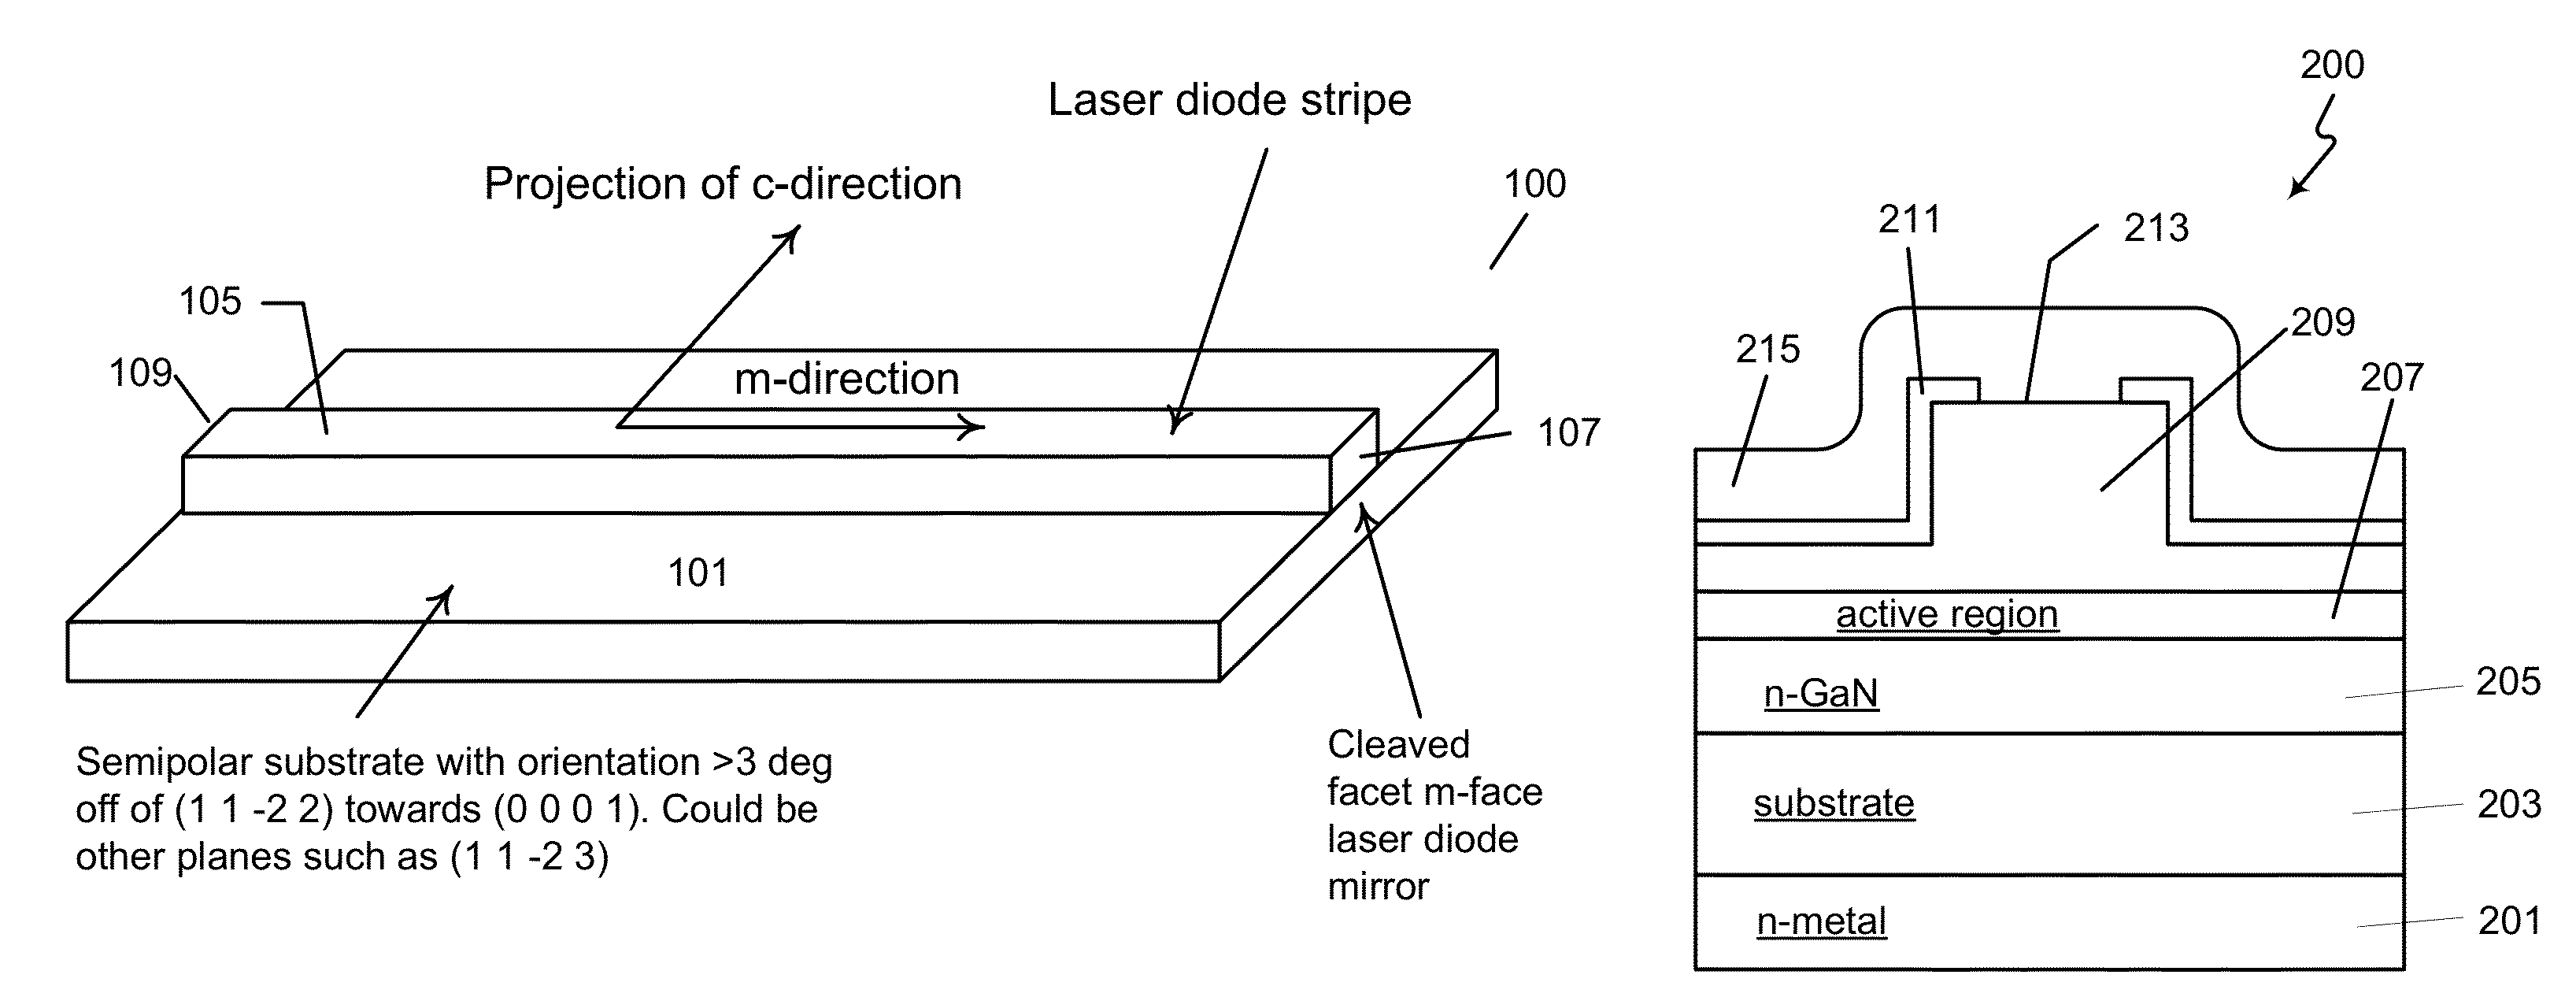 Optical device structure using miscut GaN substrates for laser applications